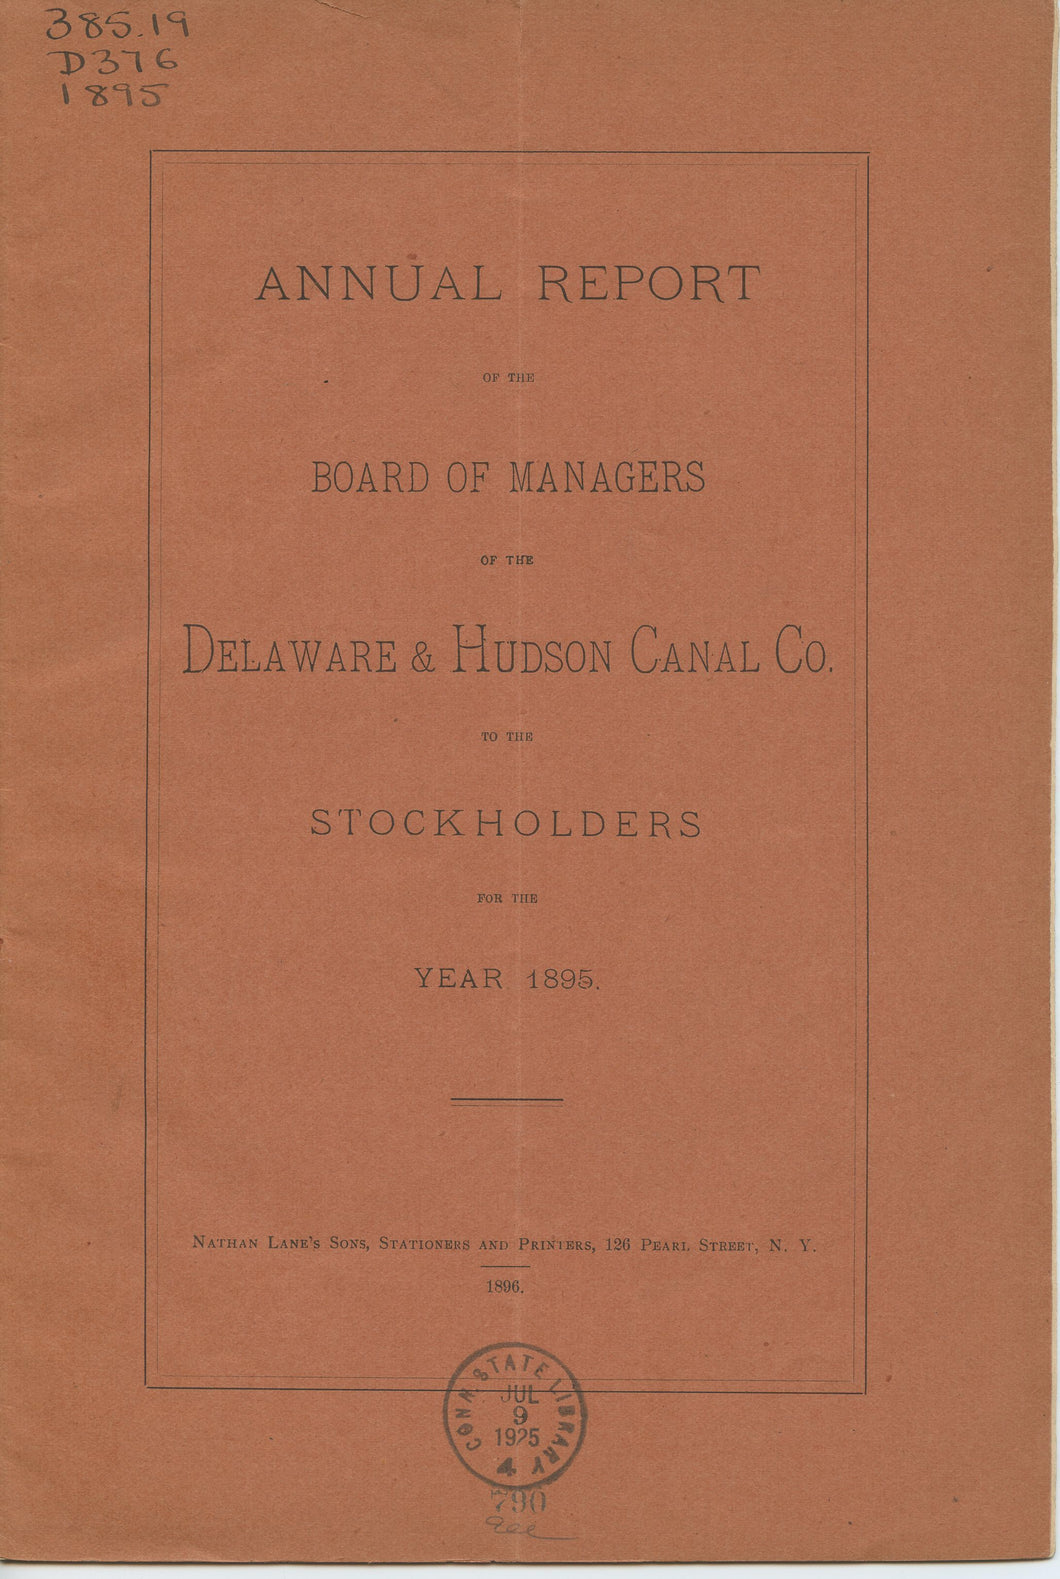 Annual Report of the Board of Managers of the Delaware & Hudson Canal Co. to the Stockholders, for the Year 1895